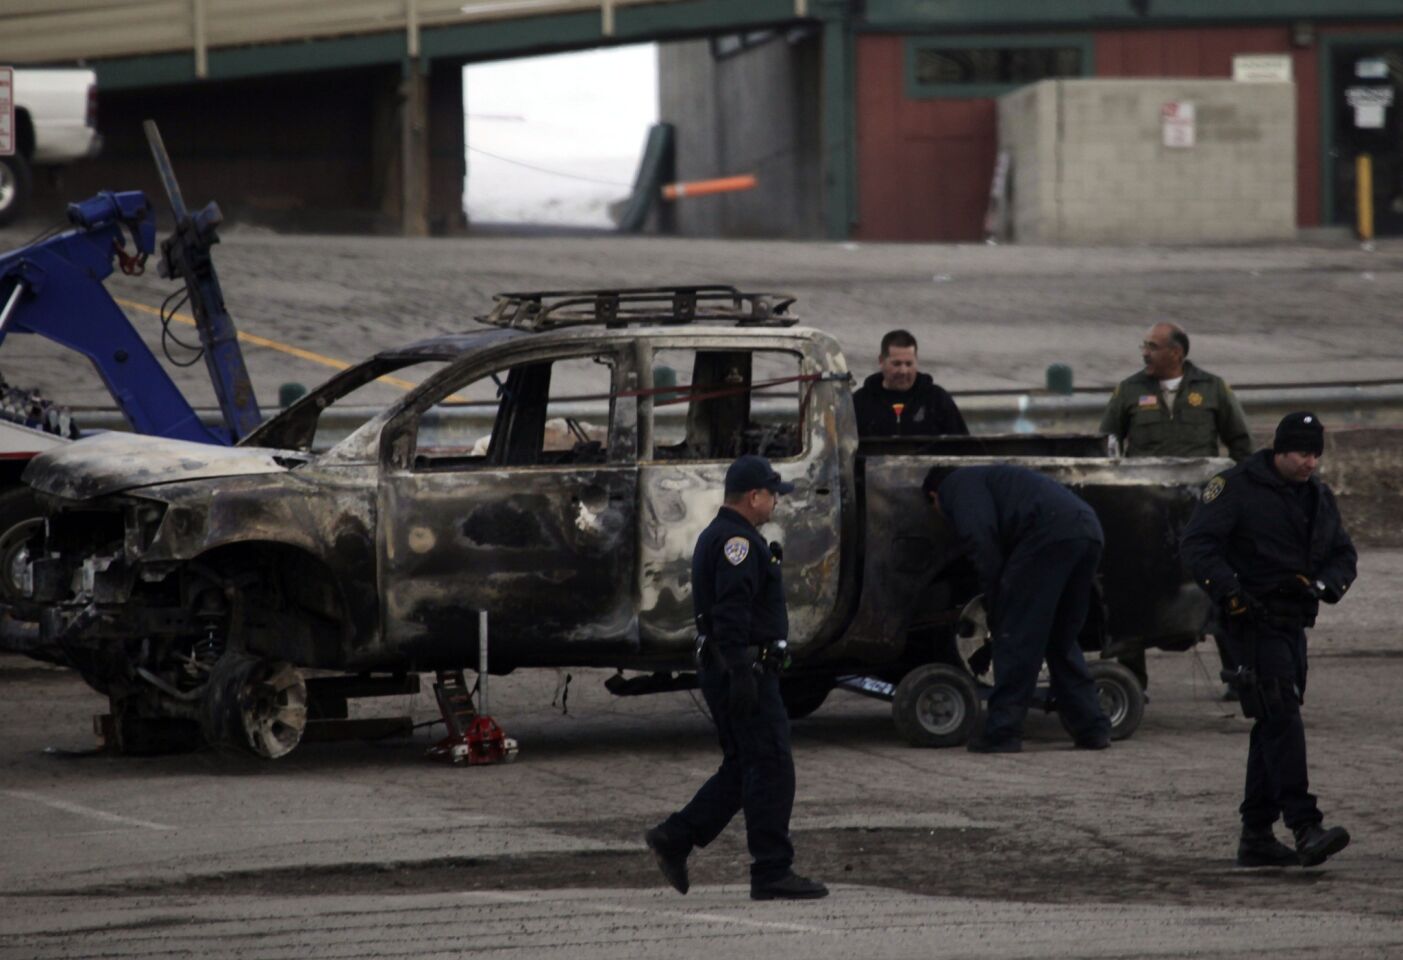 Law enforcement officials found the burned-out truck that police believe shooting suspect Christopher Jordan Dorner used to leave the scene of a killing in Riverside. The truck was found on a forestry road near the Bear Mountain ski area.